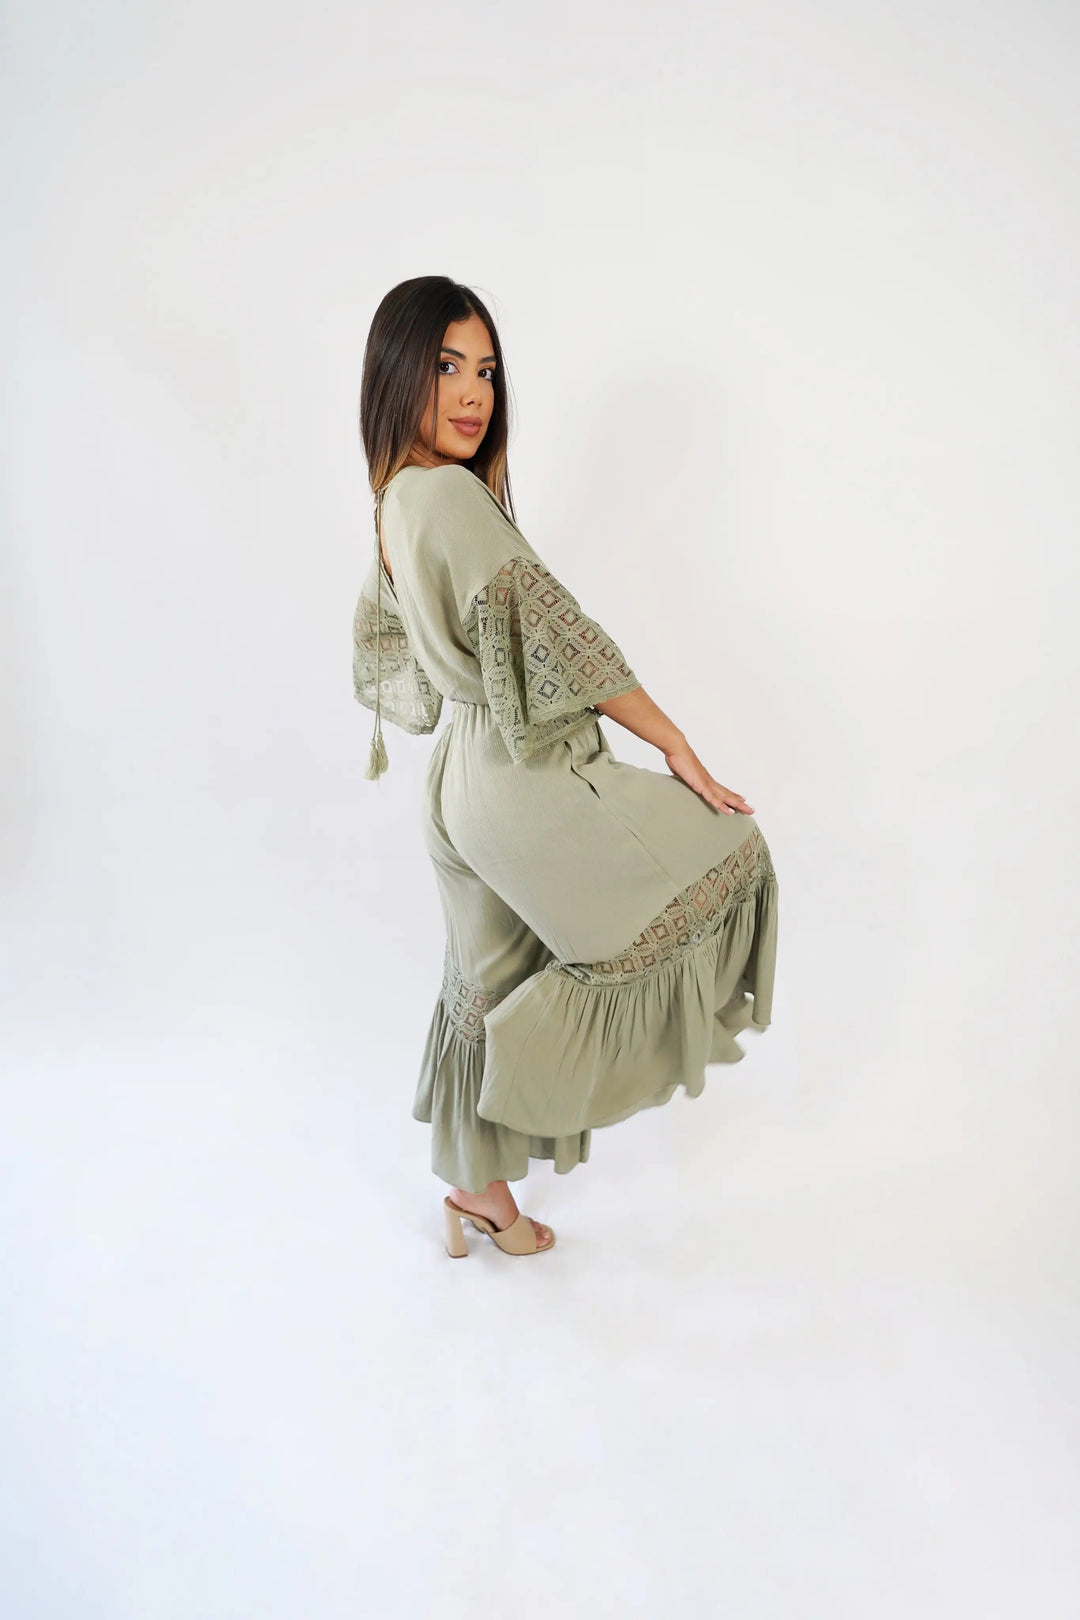 Desert Dreams Lace Jumpsuit in Cactus - Southern Peach 